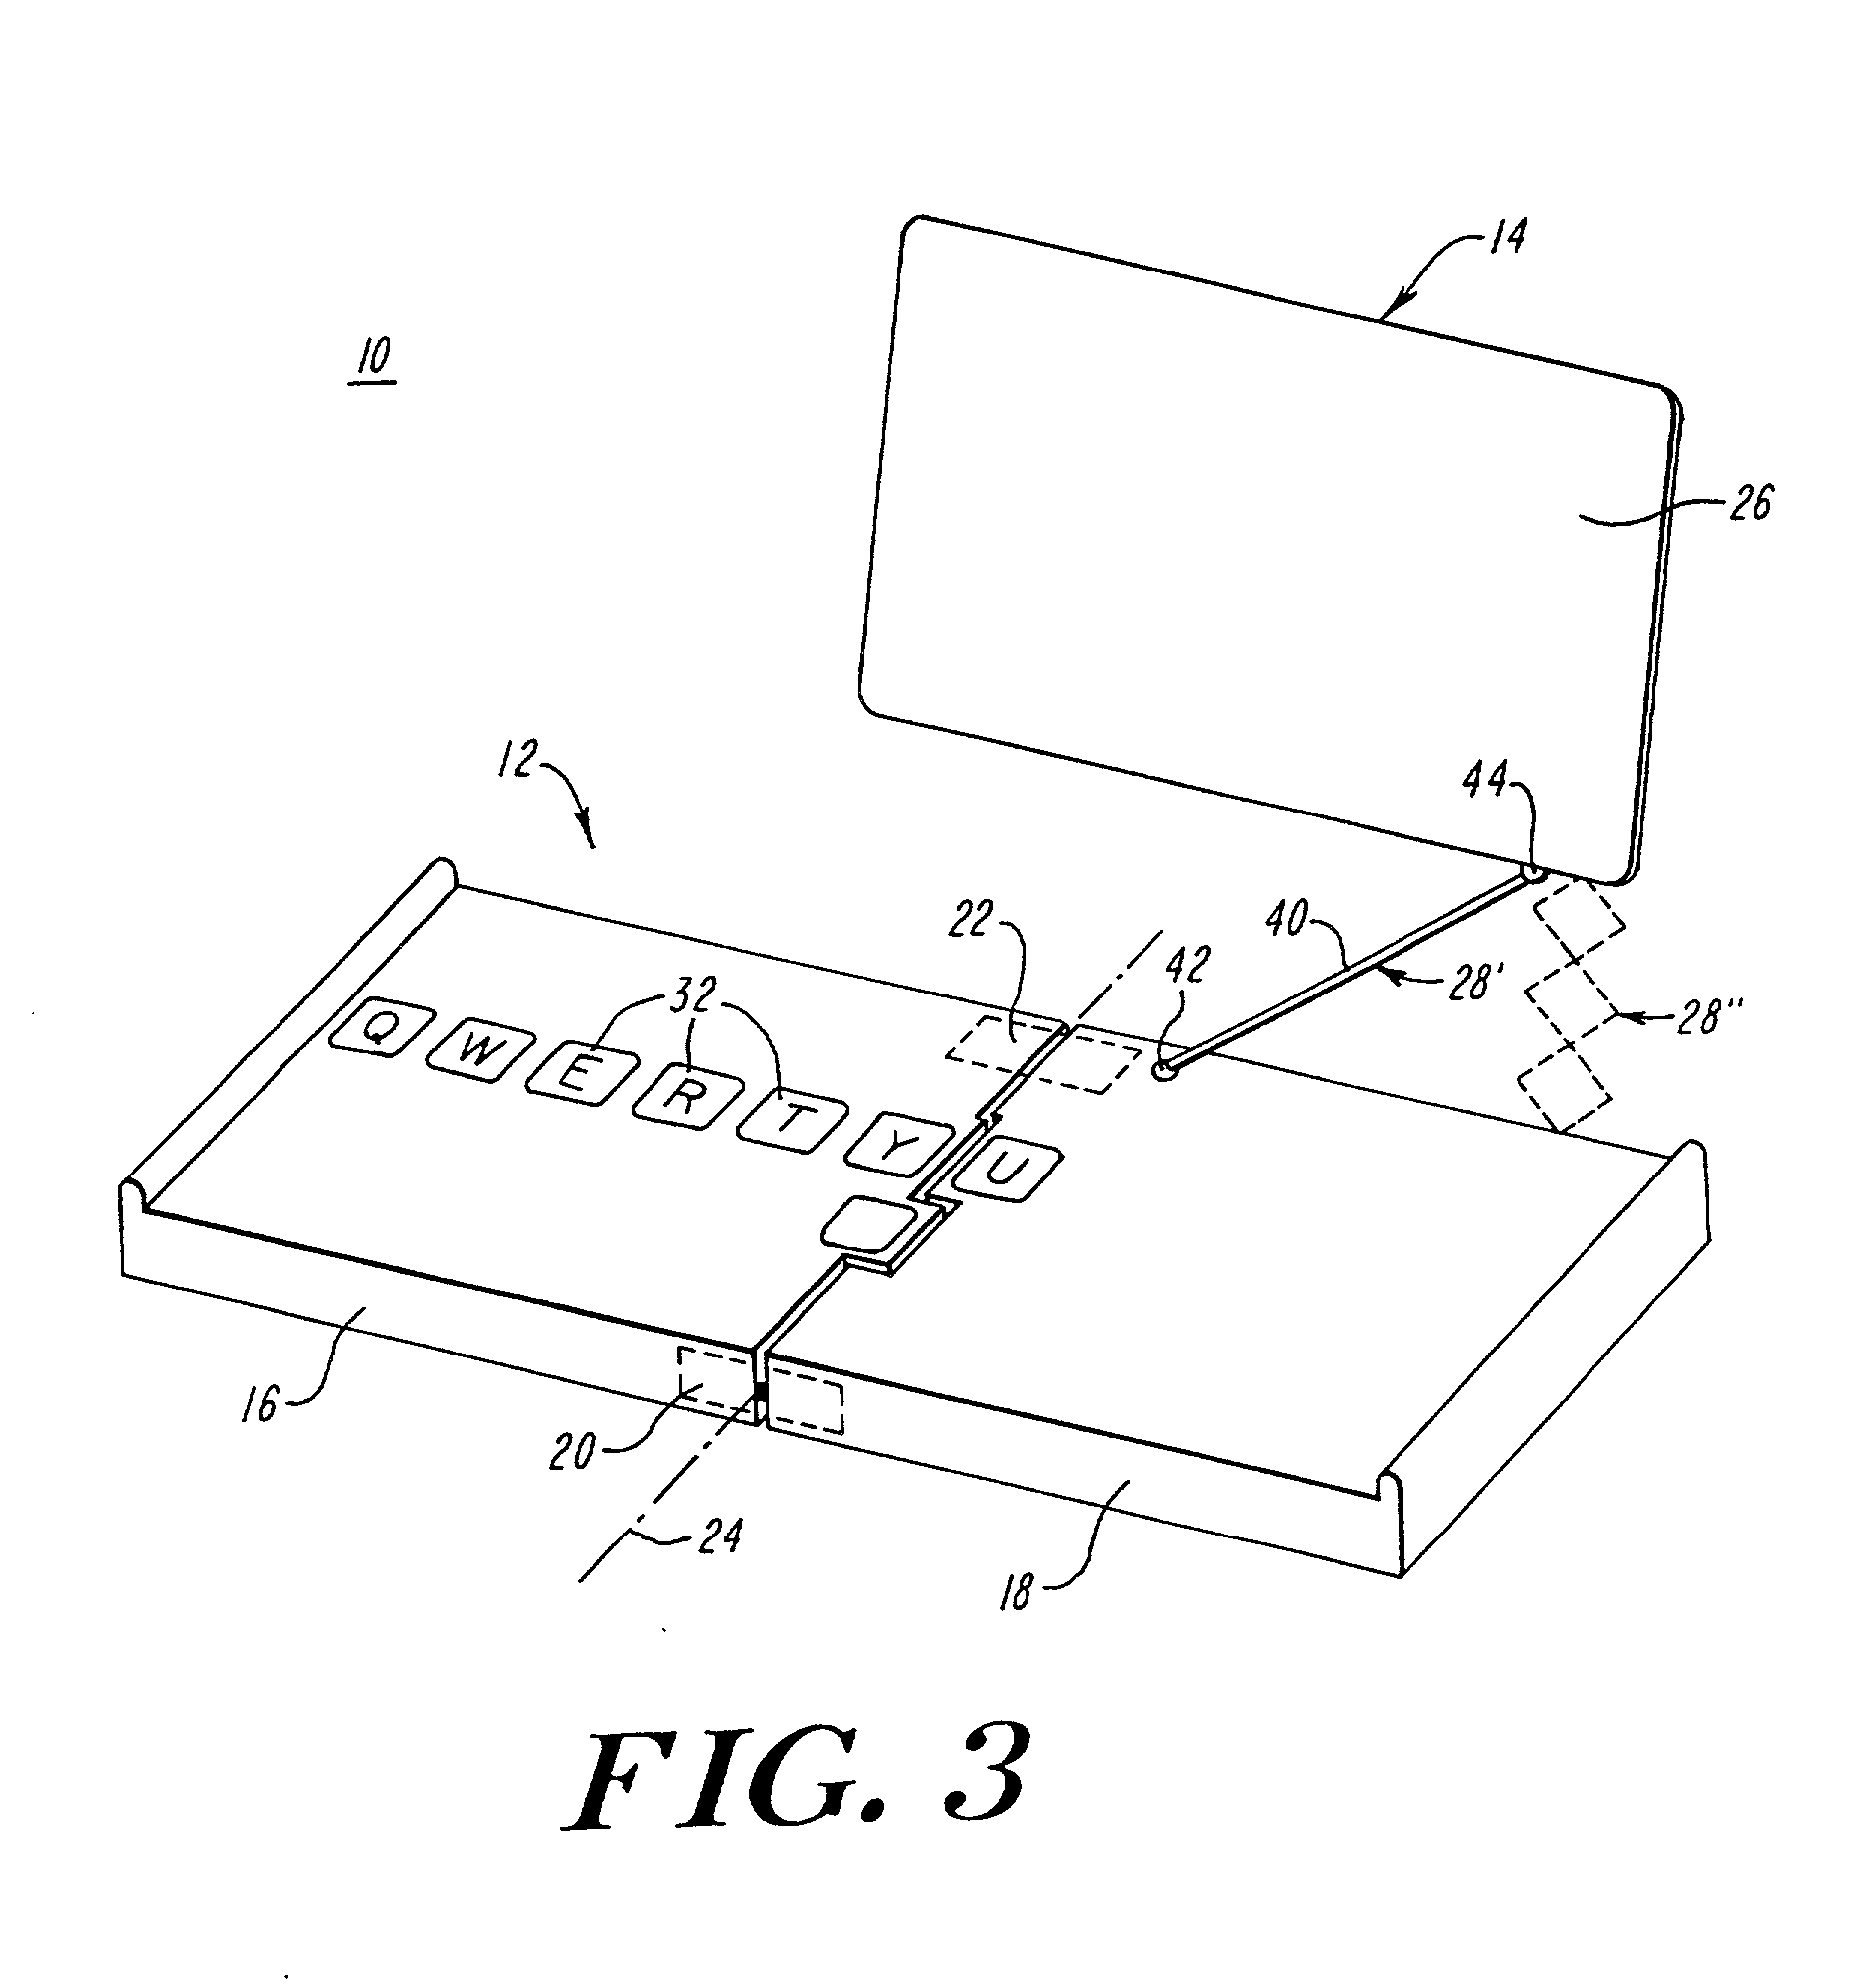 Collapsible portable electronic device with display